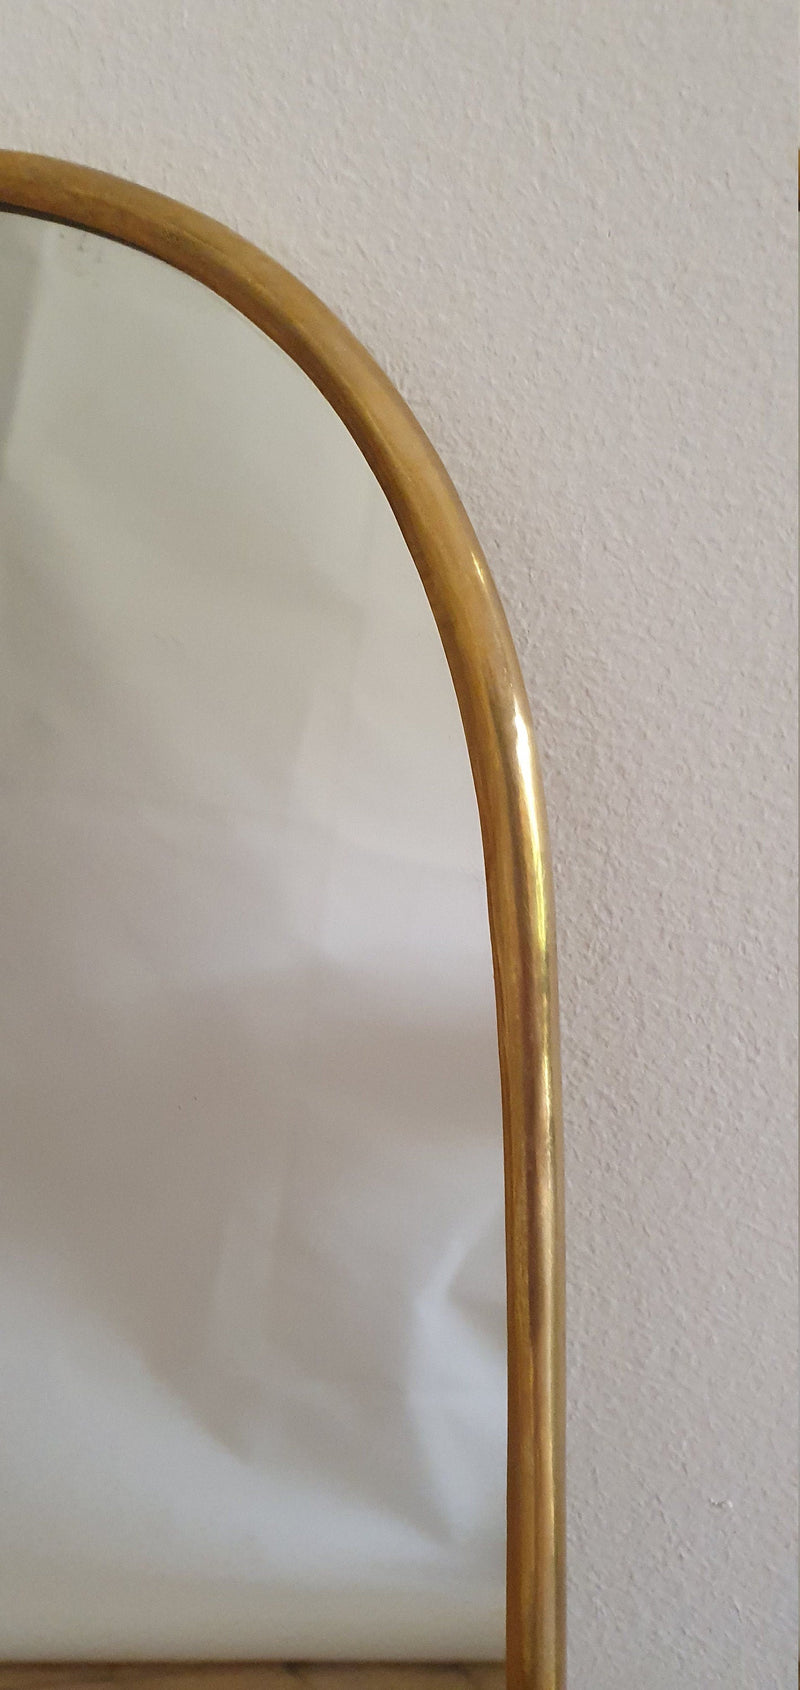 Handcrafted Unlacquered Brass Mirror | Unique Home Decor | Wall Hanging Vanity Mirror